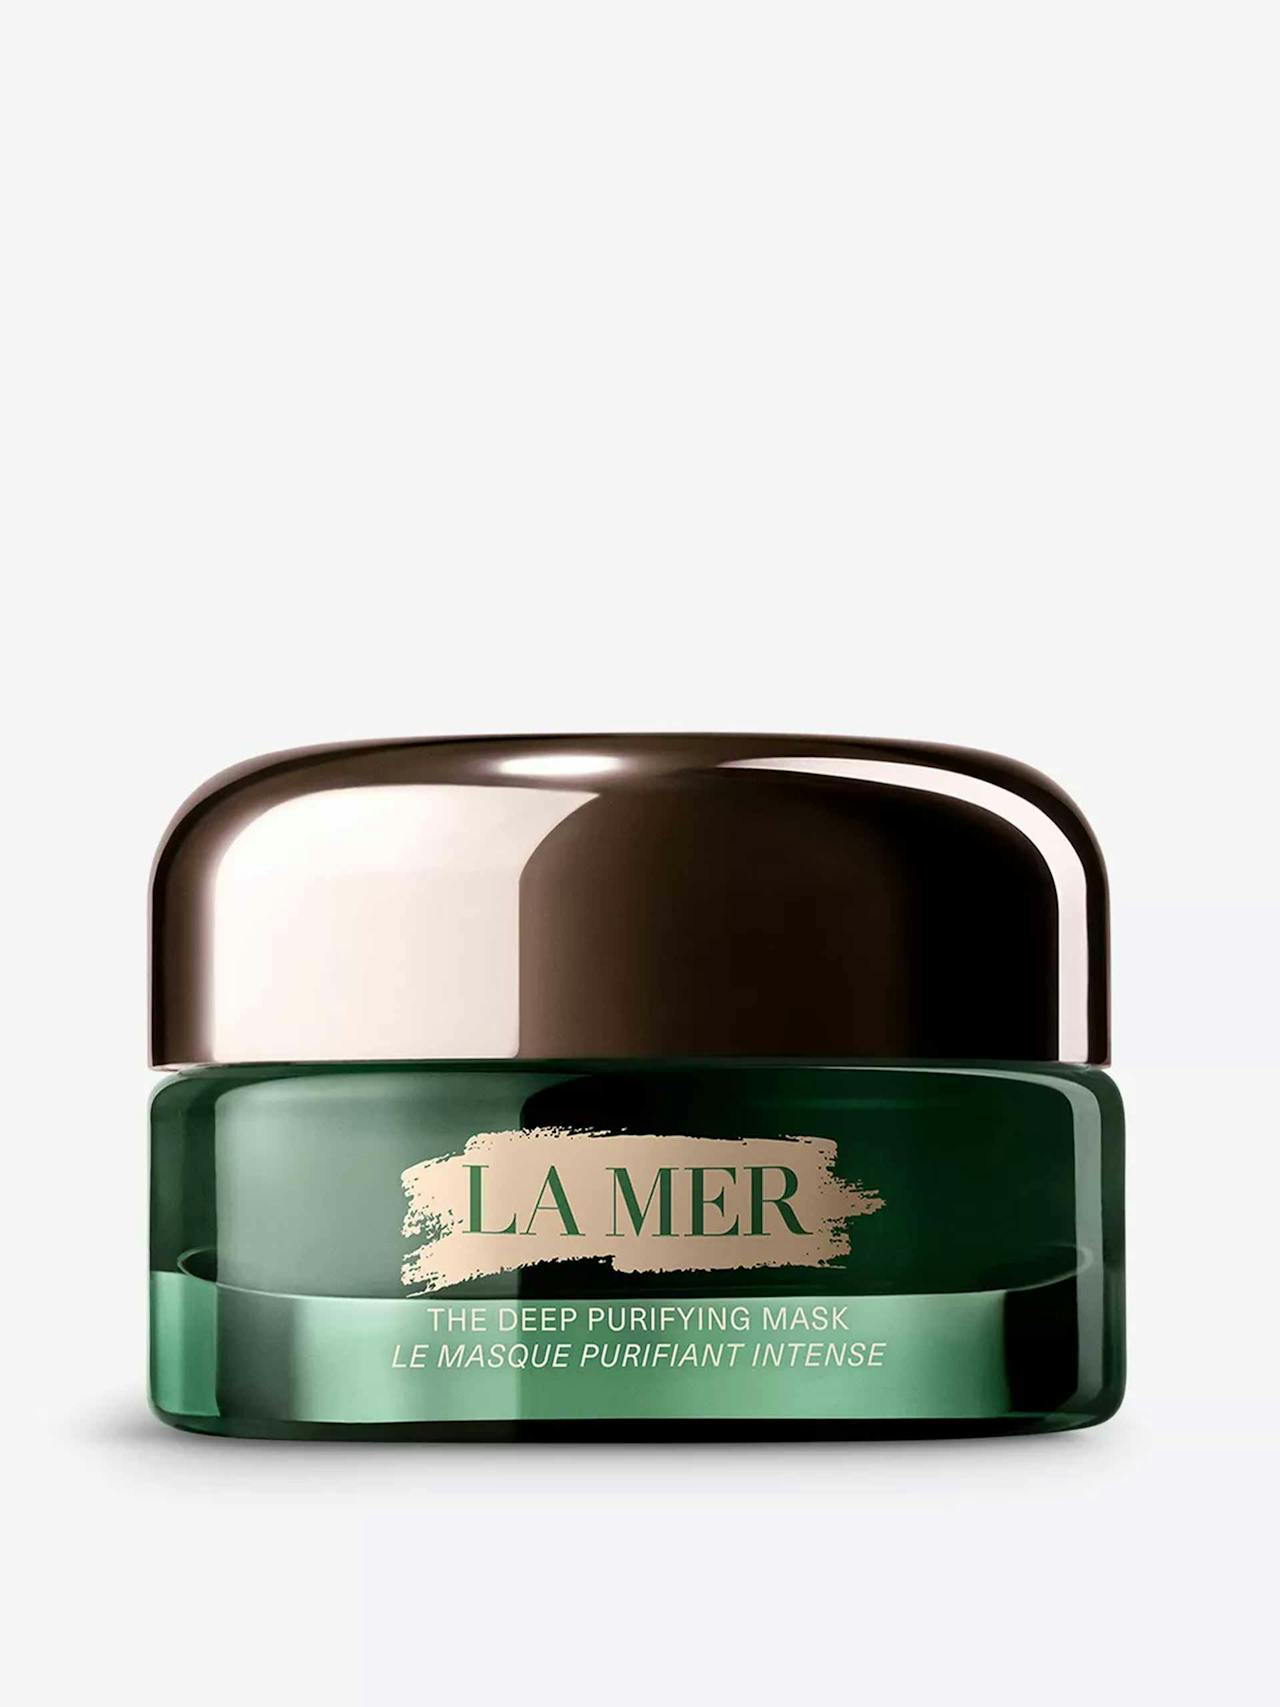 The new deep purifying mask